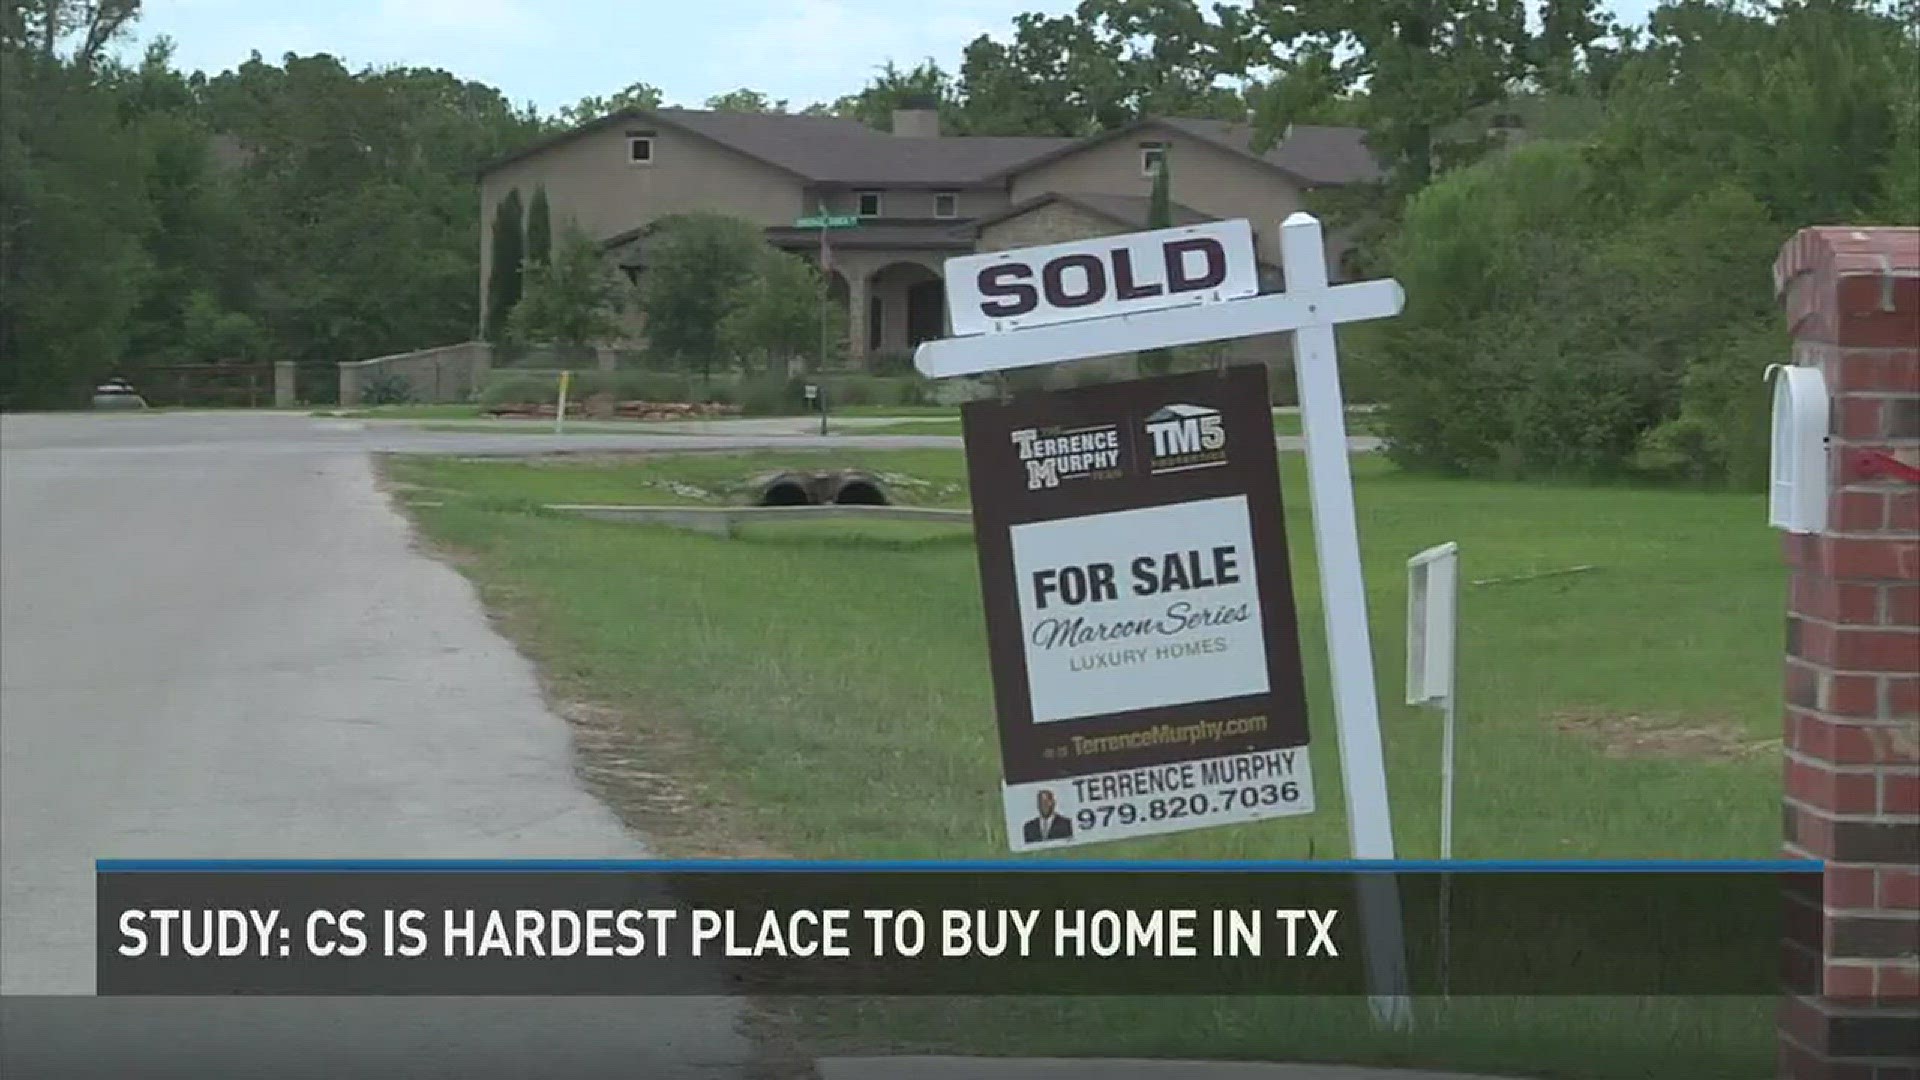 A new study shows Bryan/College Station is the hardest place to afford a home in the state.